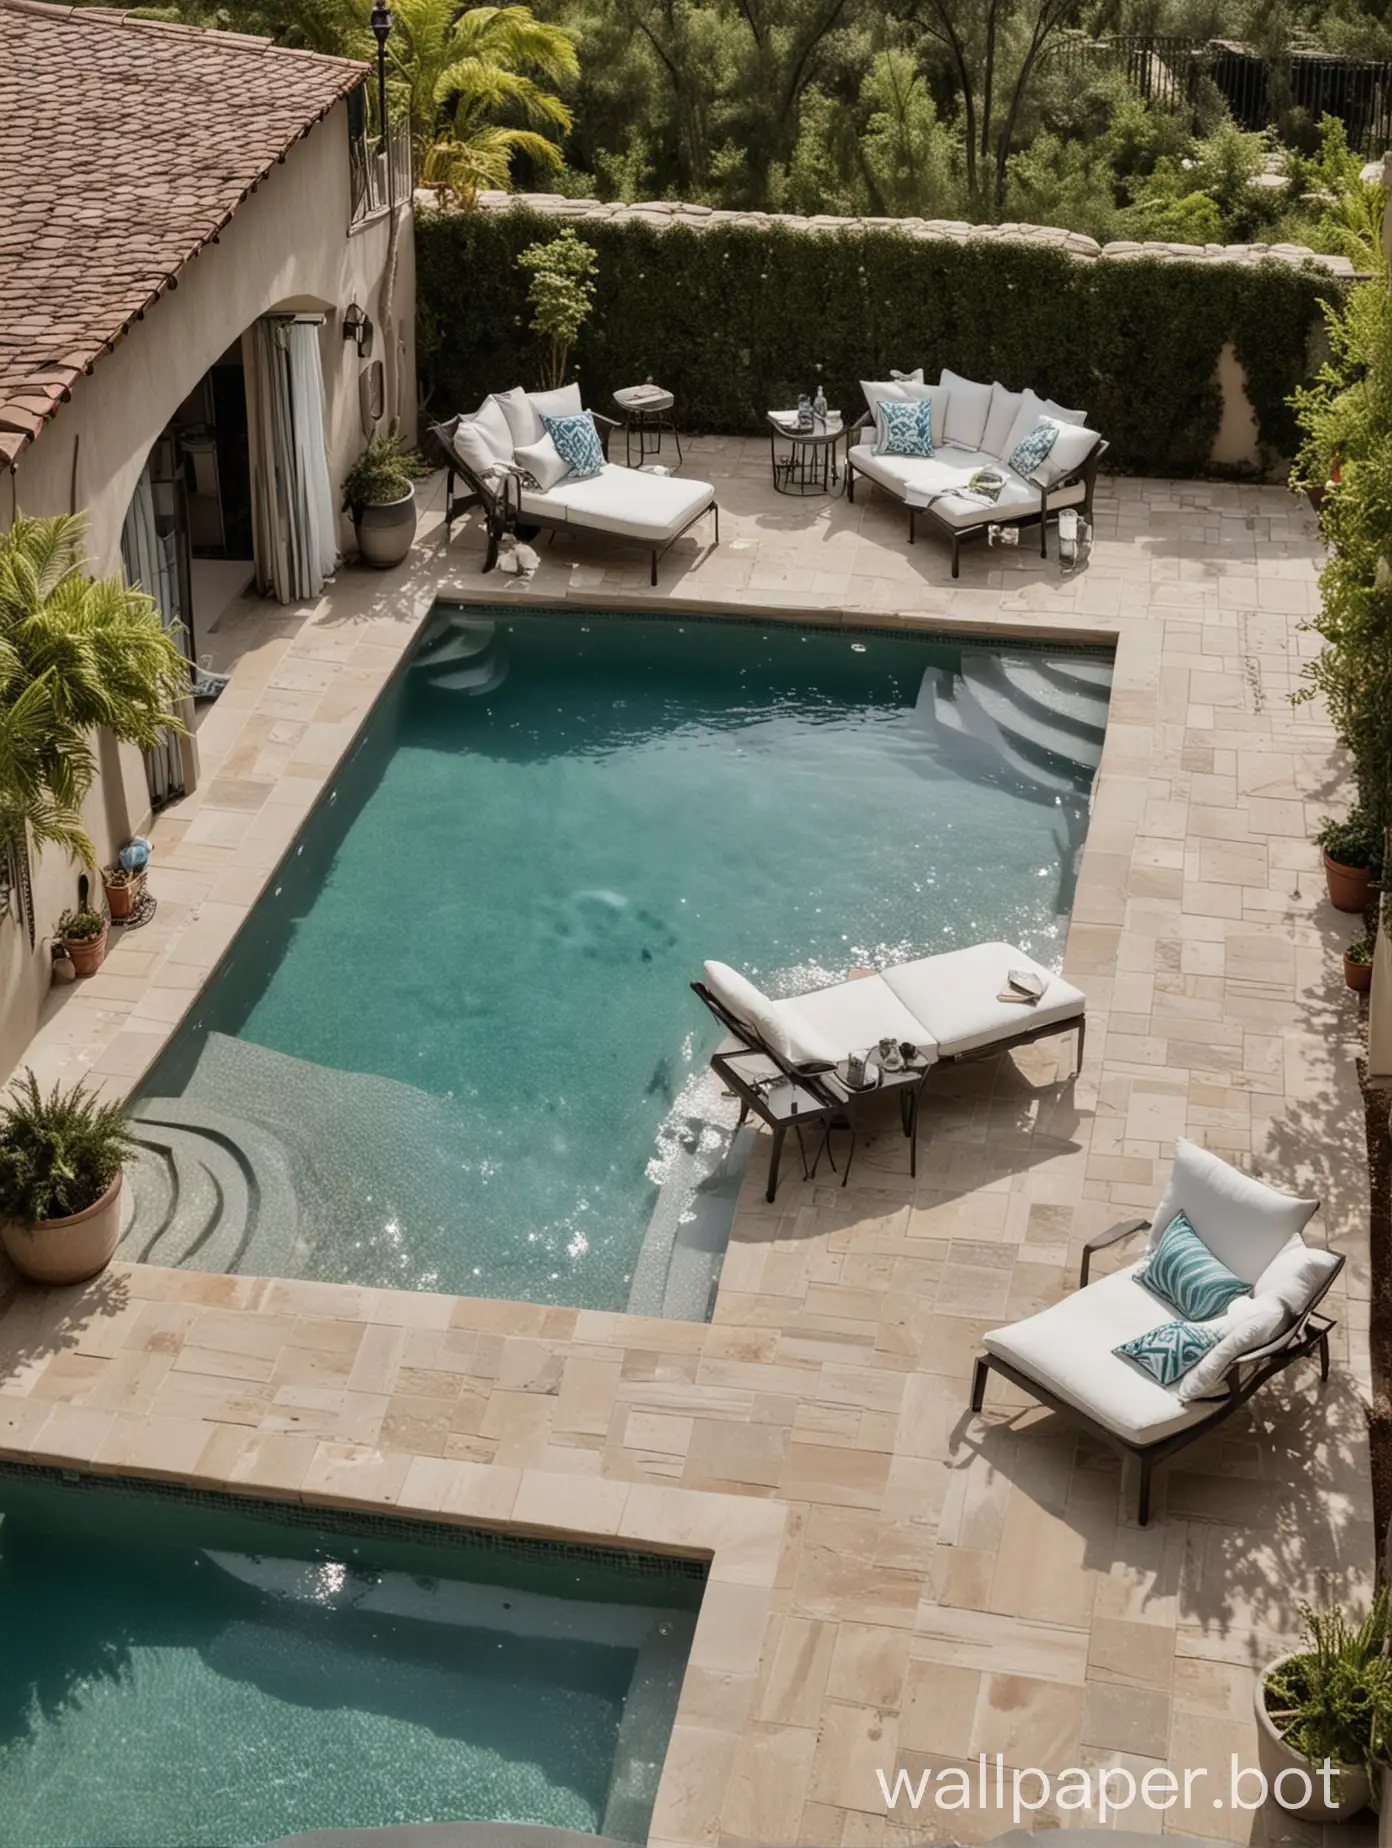 Patio furniture and a pool